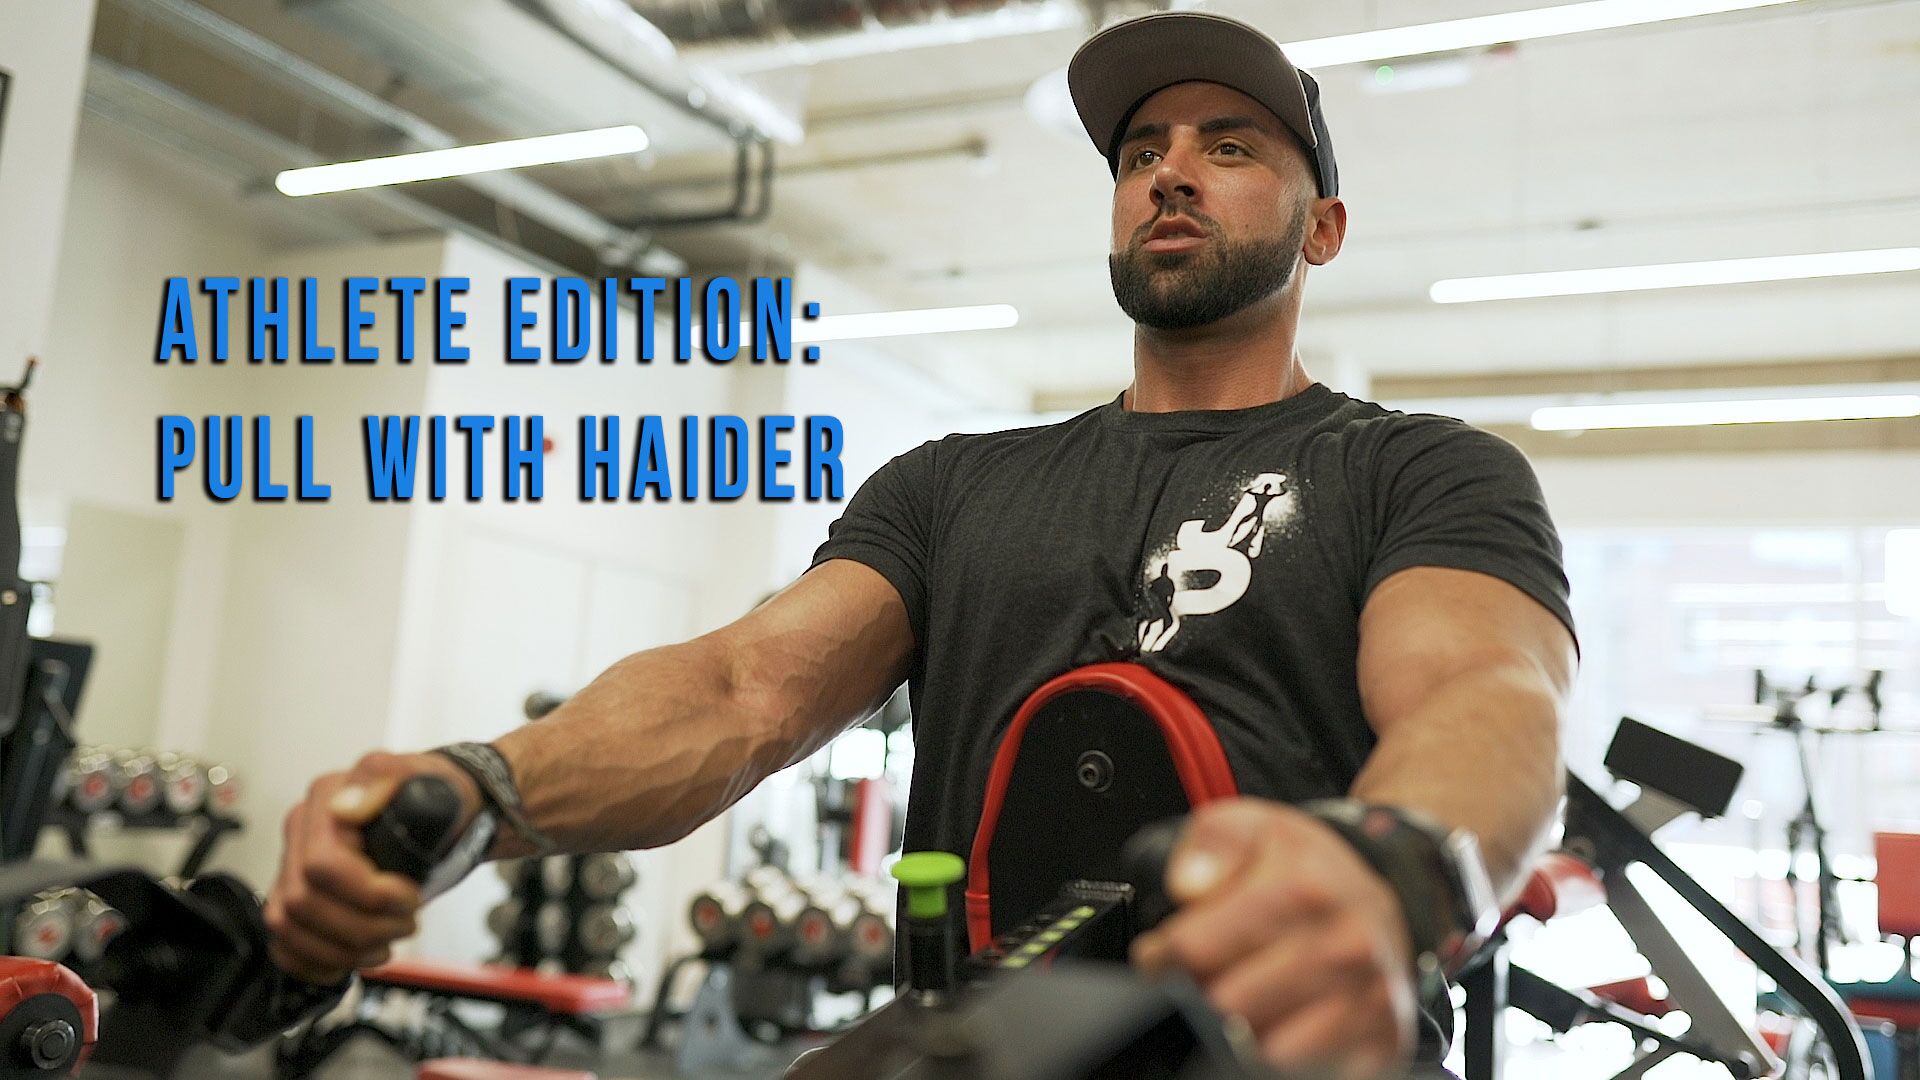 Athlete Edition: Pull With Haider